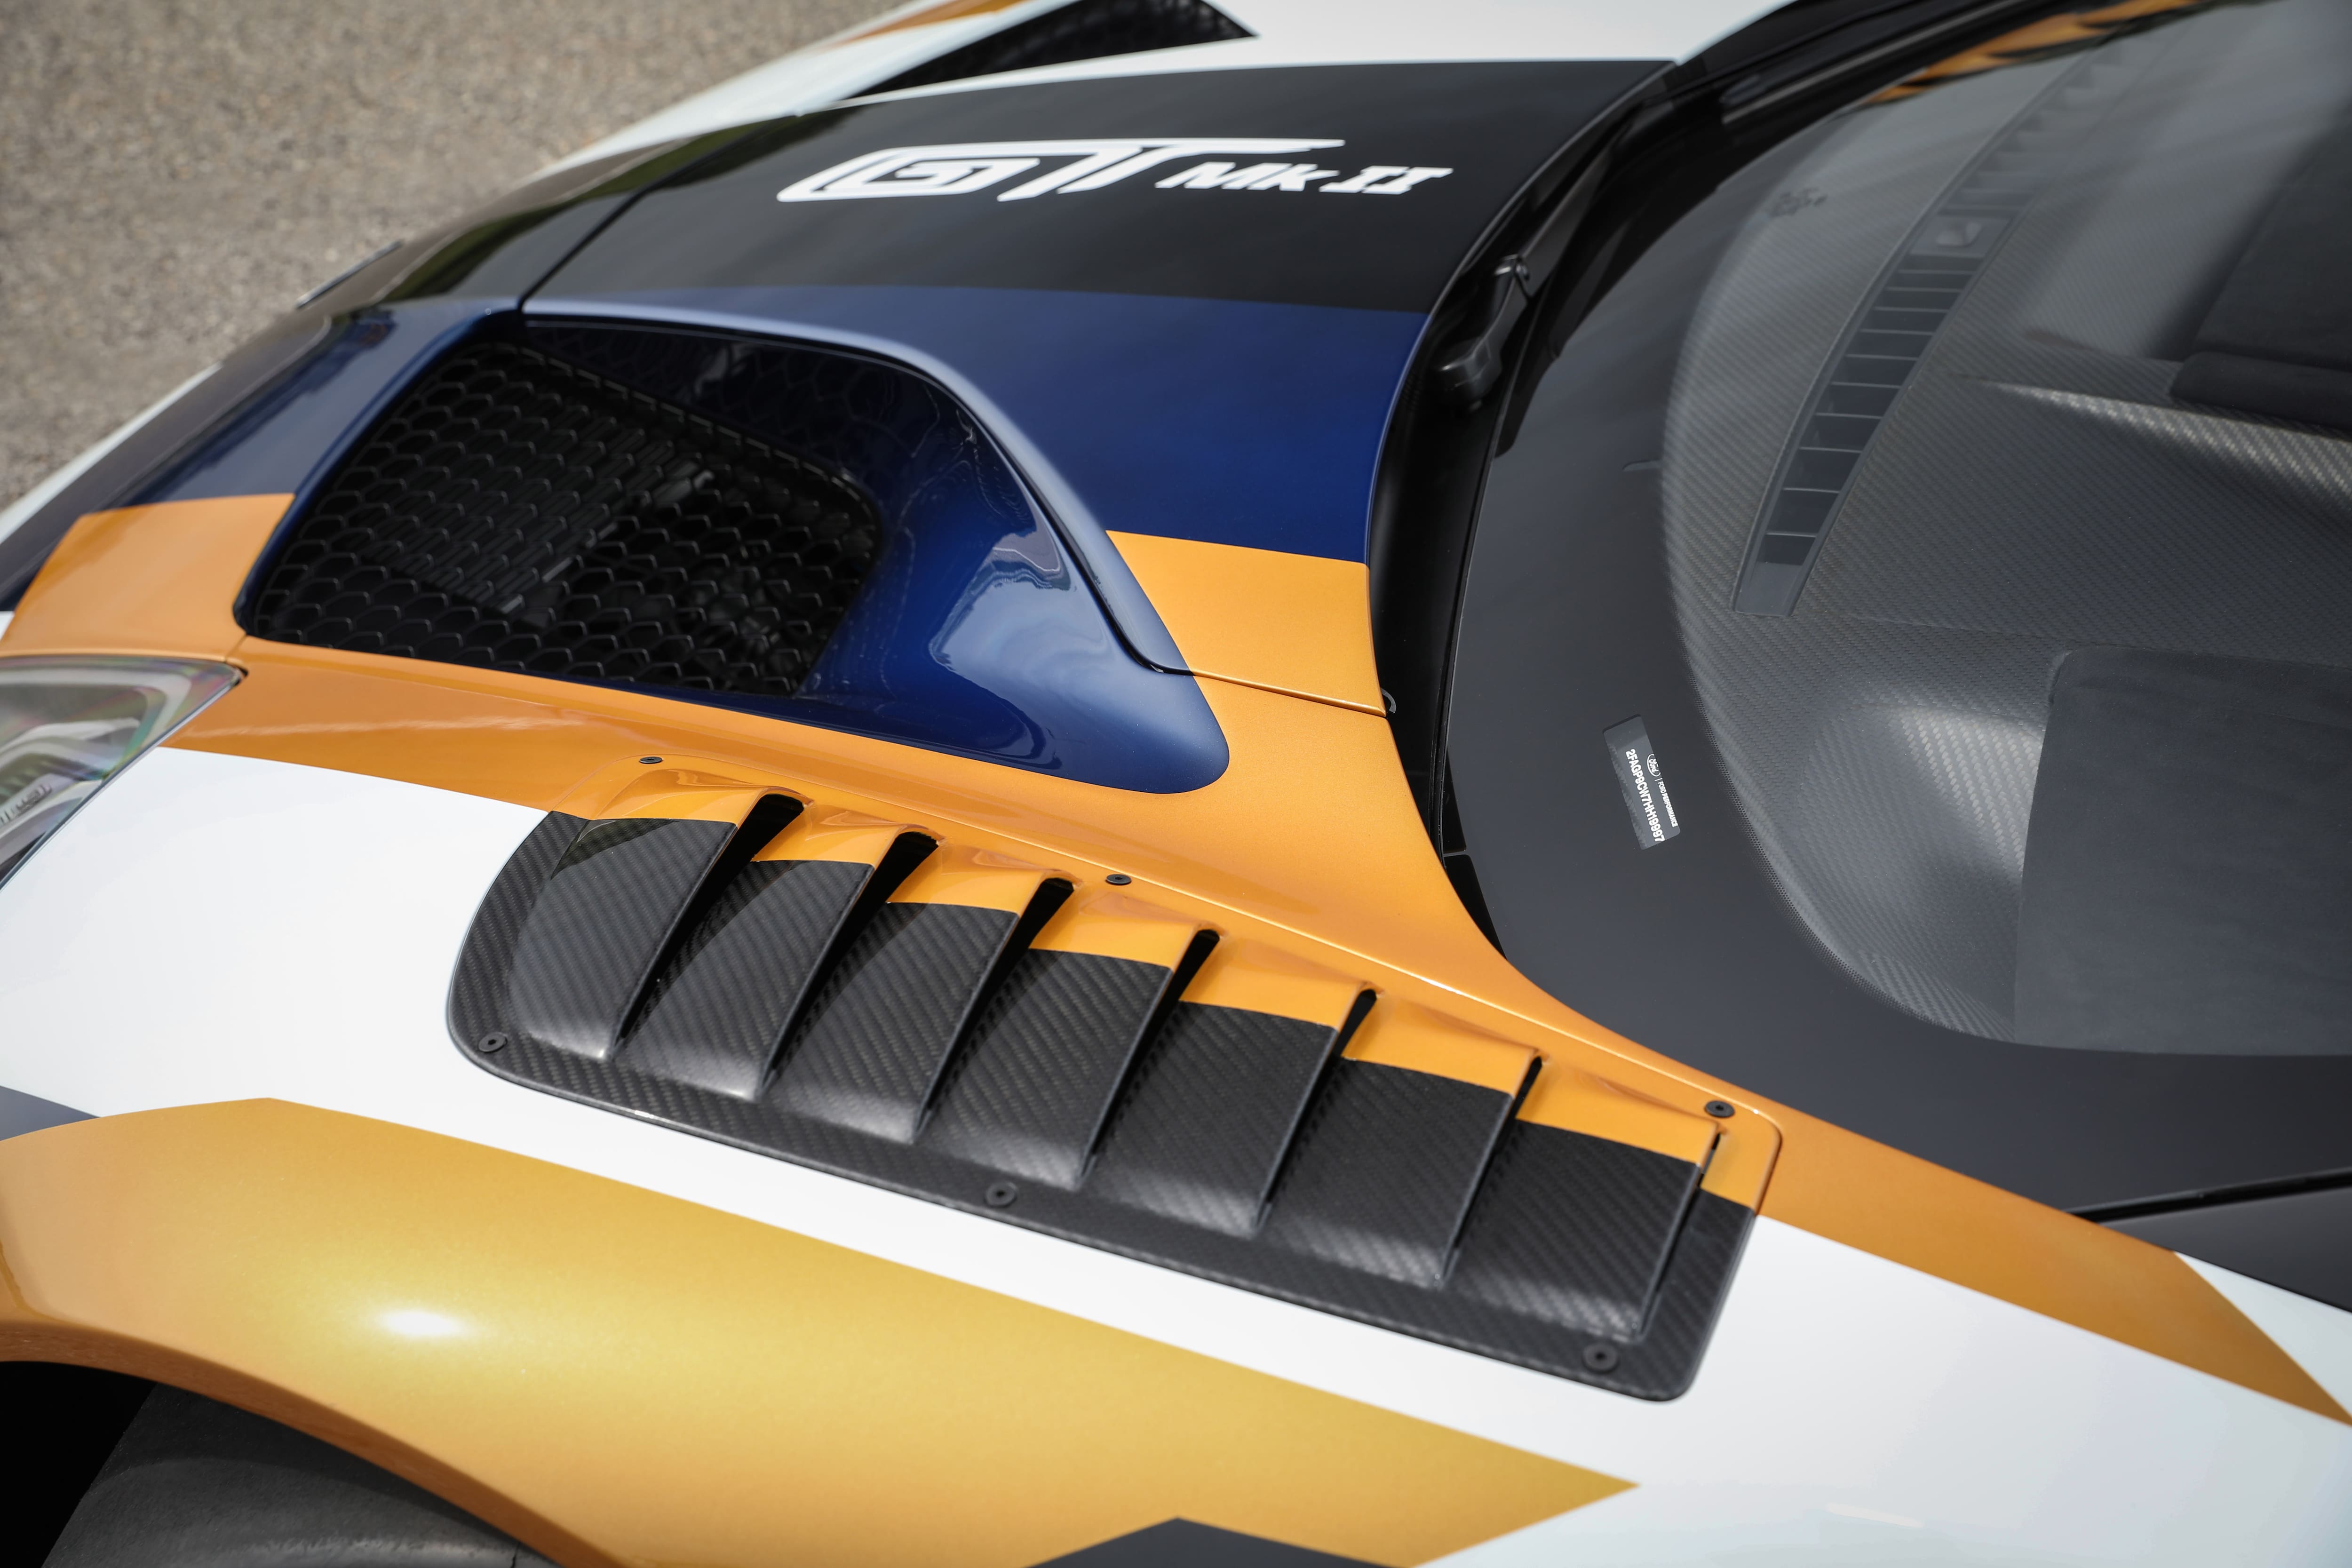 Limited Edition, Track Only Ford GT Mk II Unleashes The Next Level